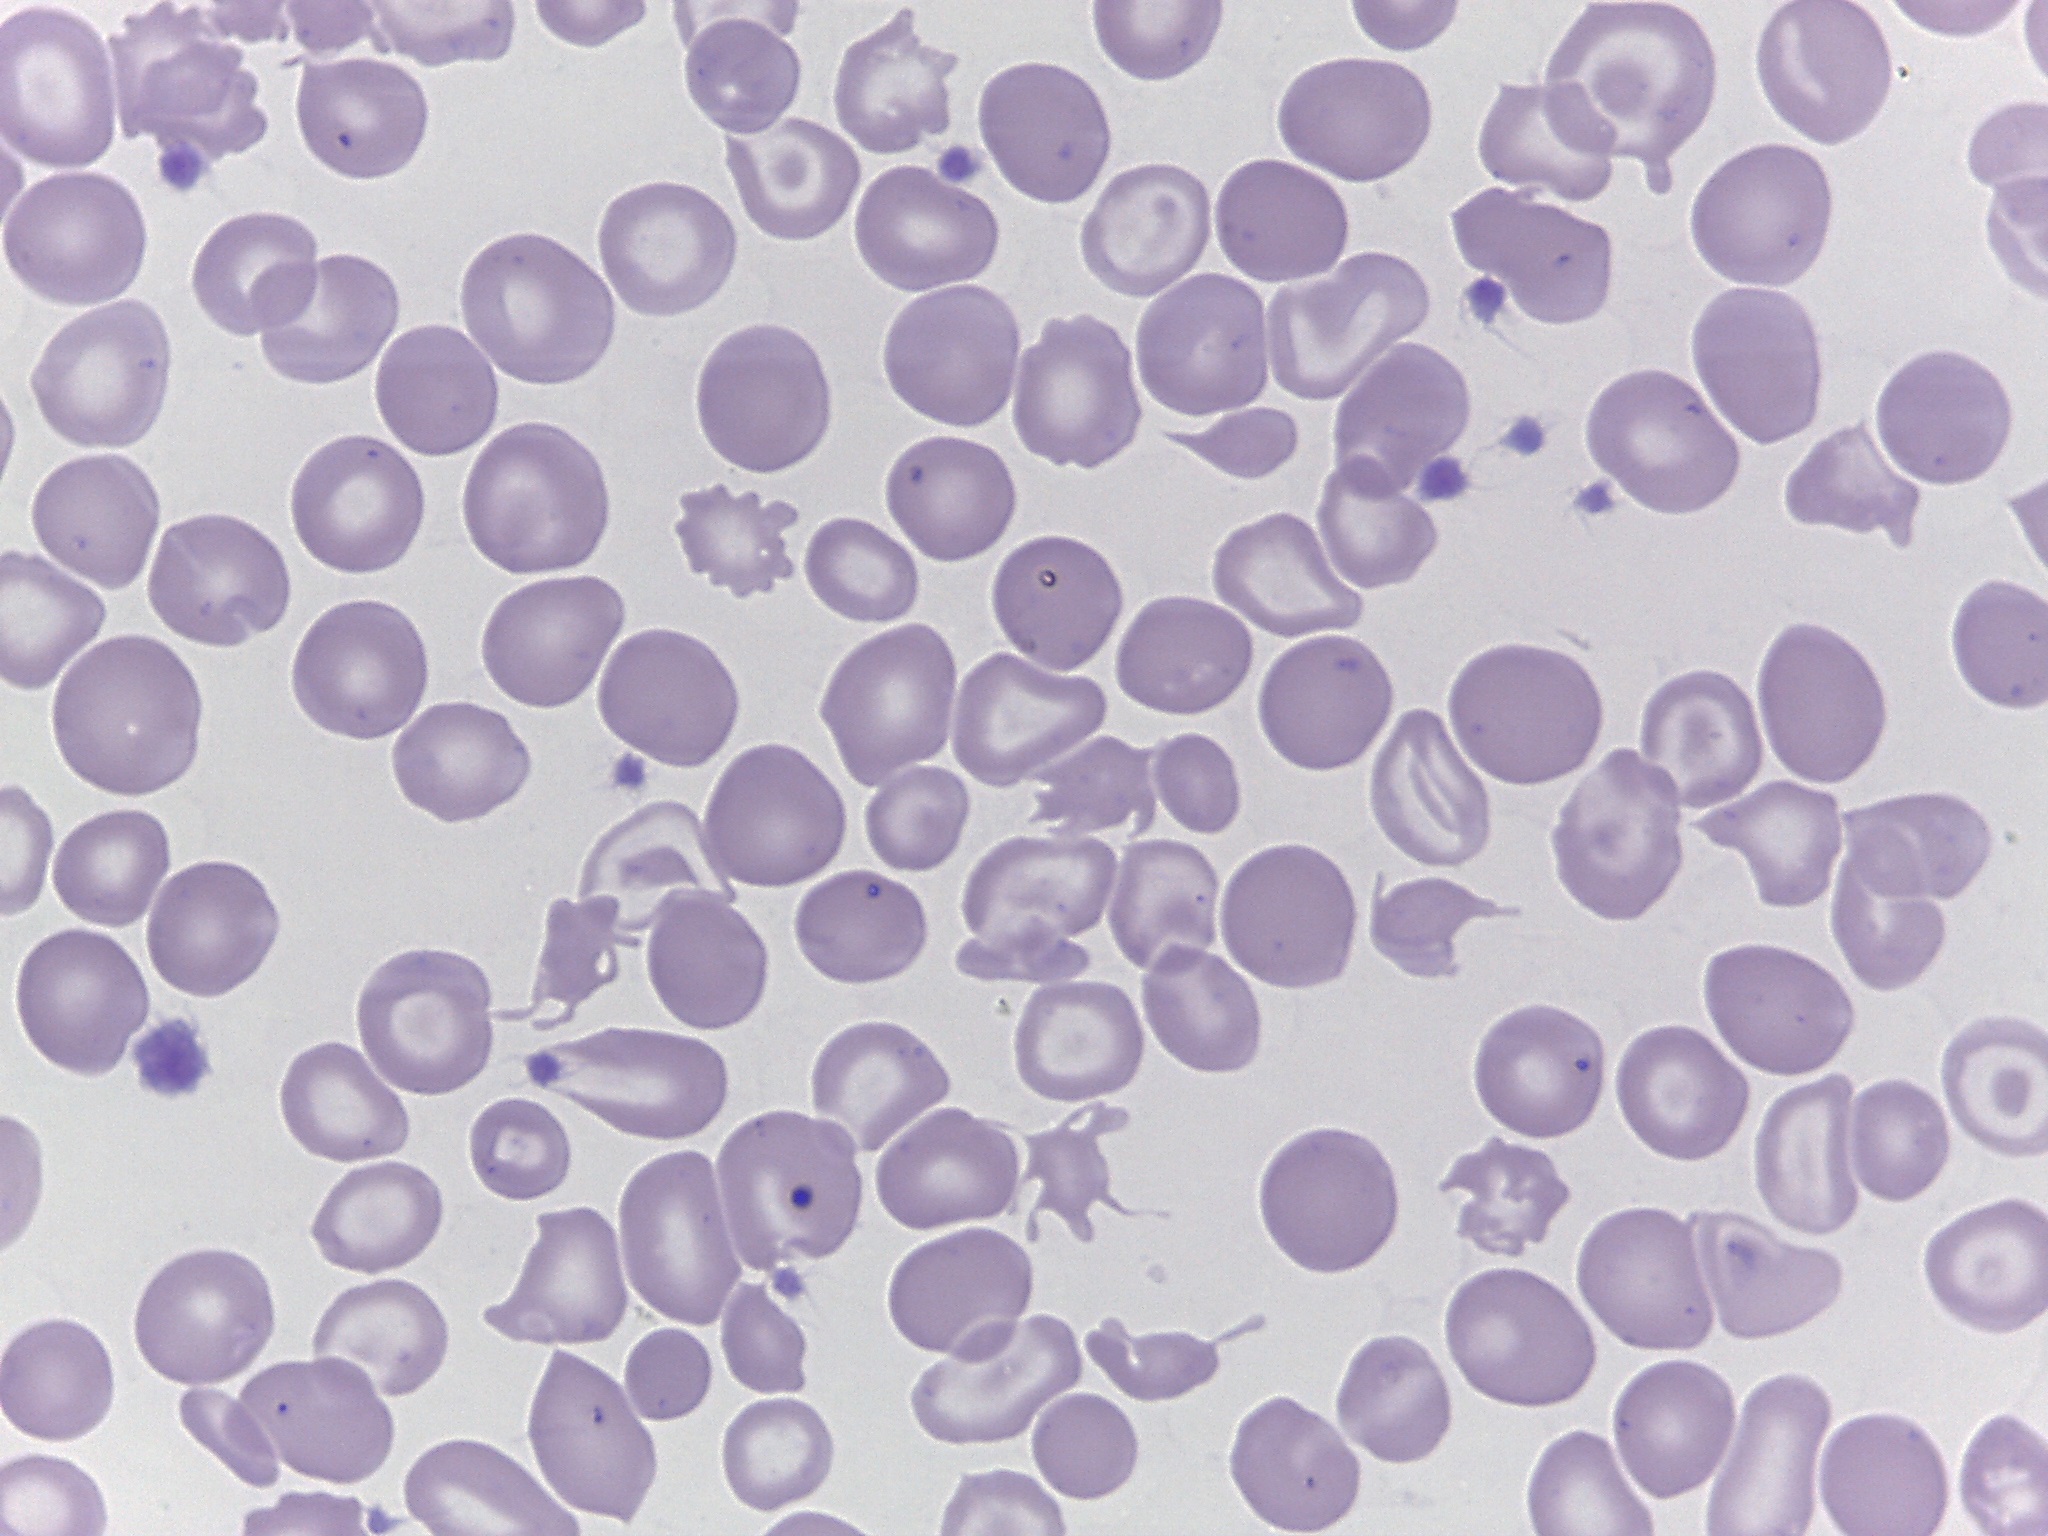 A blood smear at the Petersburg lab shows anemia. (Photo courtesy of Liz Bacom)